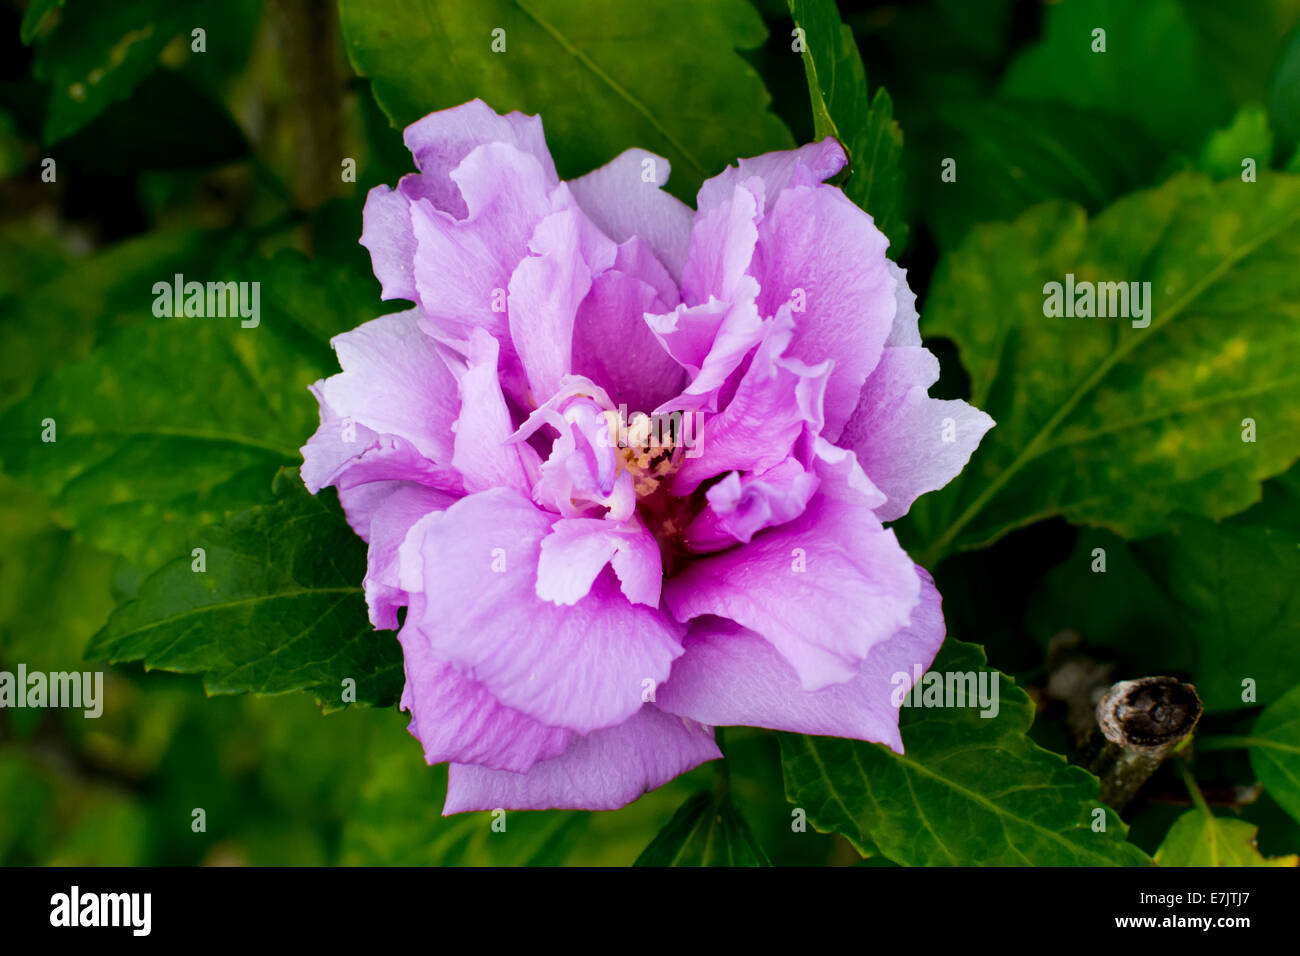 Hibiscus flower with multiple purple petals. Stock Photo